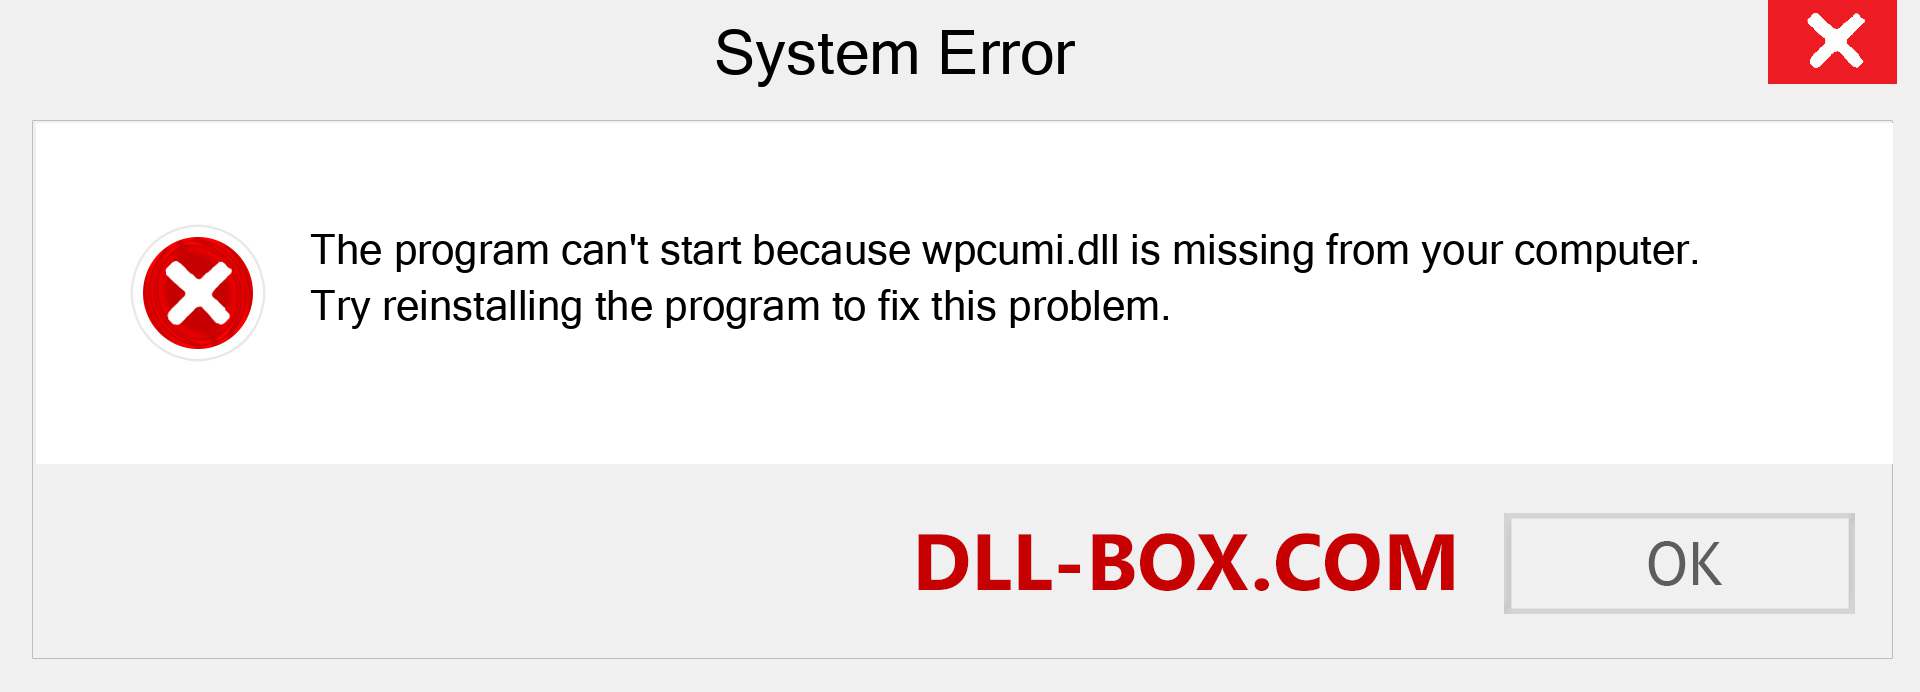  wpcumi.dll file is missing?. Download for Windows 7, 8, 10 - Fix  wpcumi dll Missing Error on Windows, photos, images